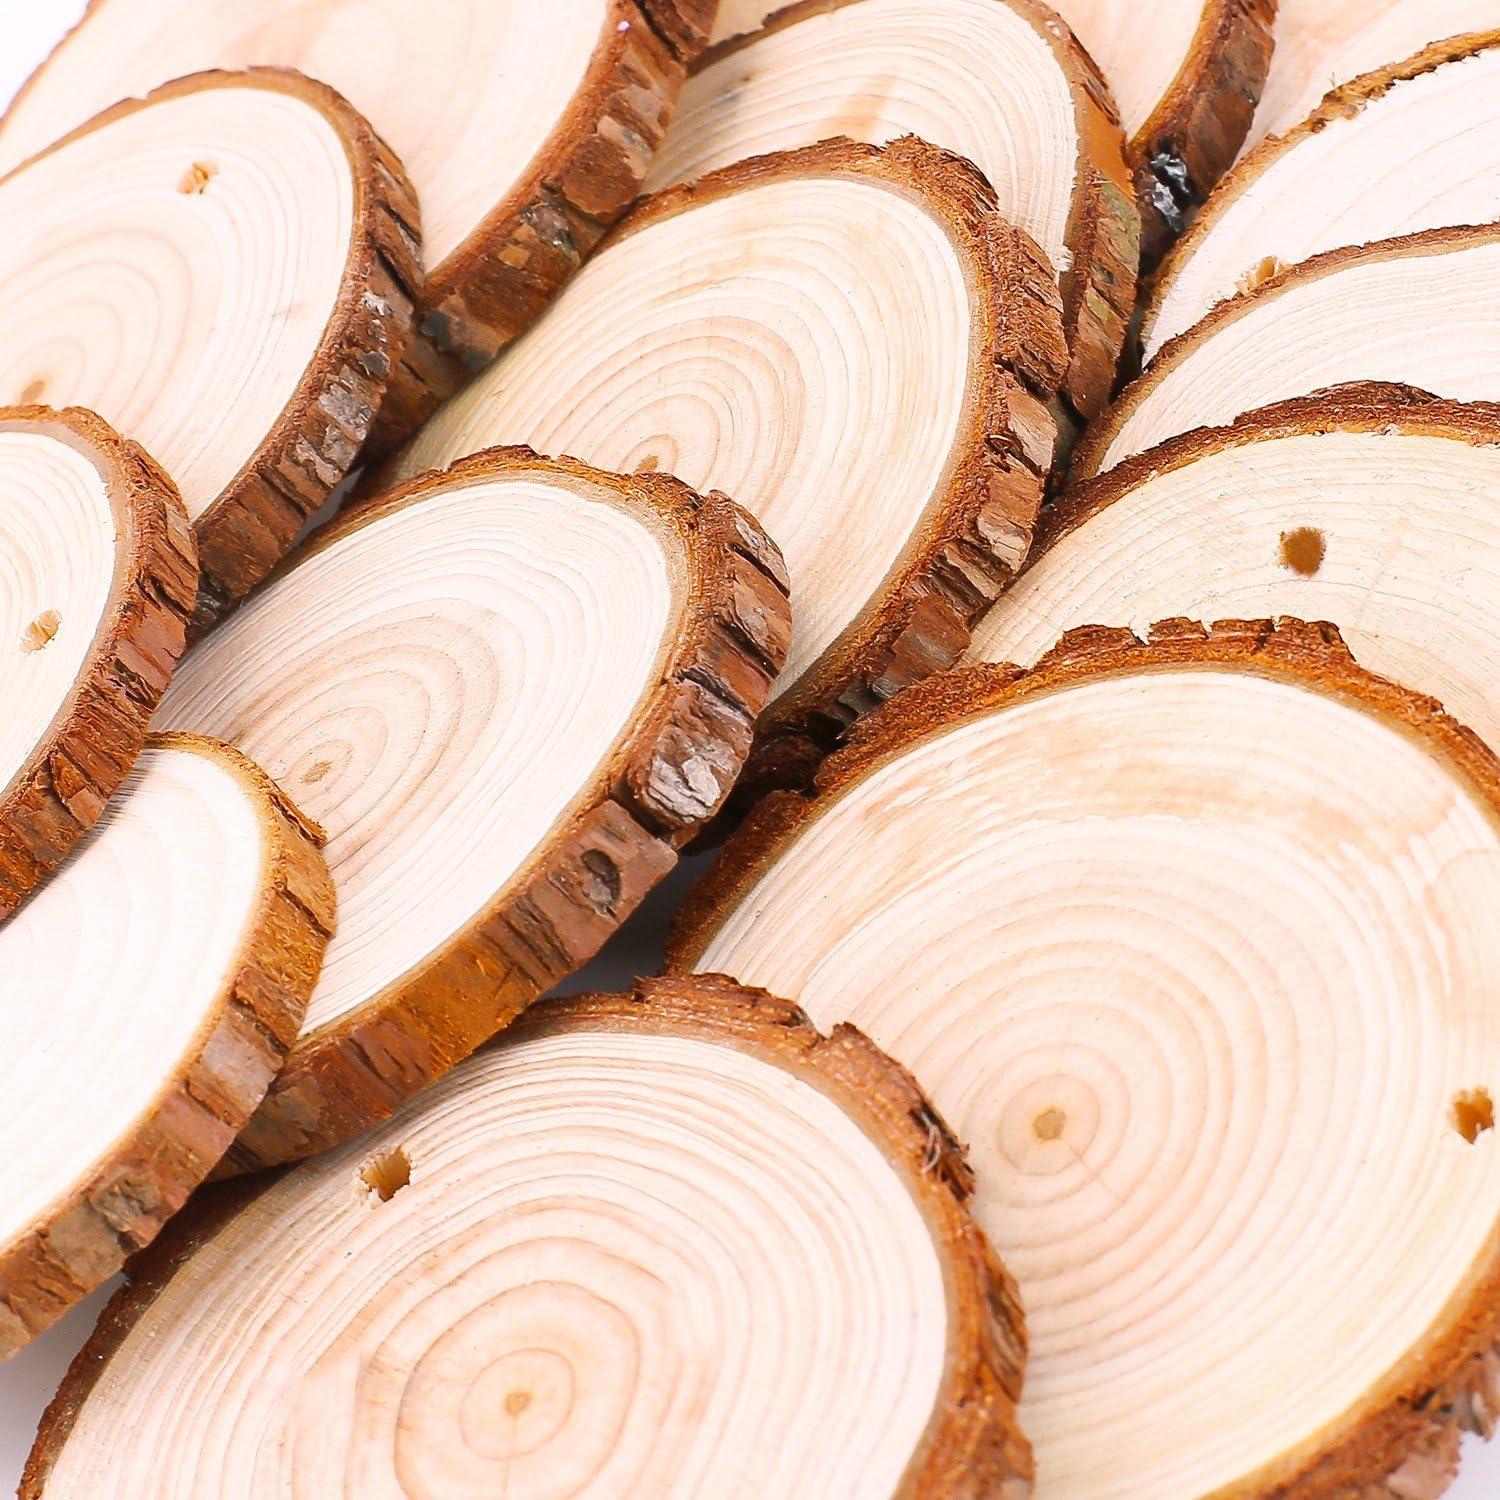 20 Wood Slices 6 8 Cm Rustic Wood Rounds 3 Inch Wood Slices Wood